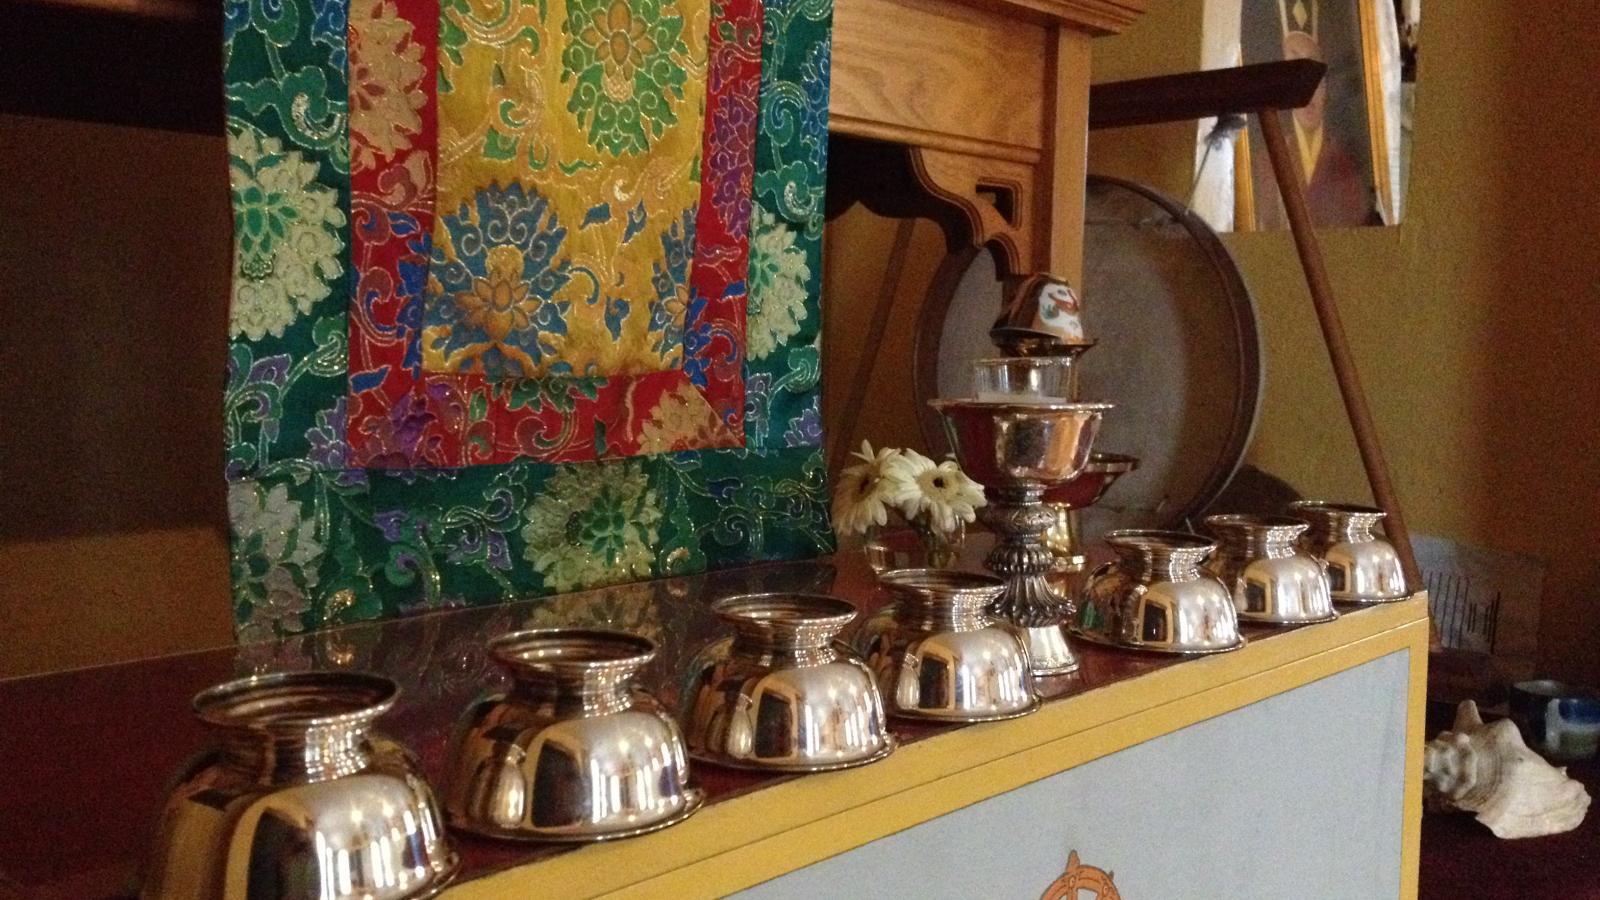 Silver bowls used for offerings at the Columbus Karma Thegsum Chöling Center